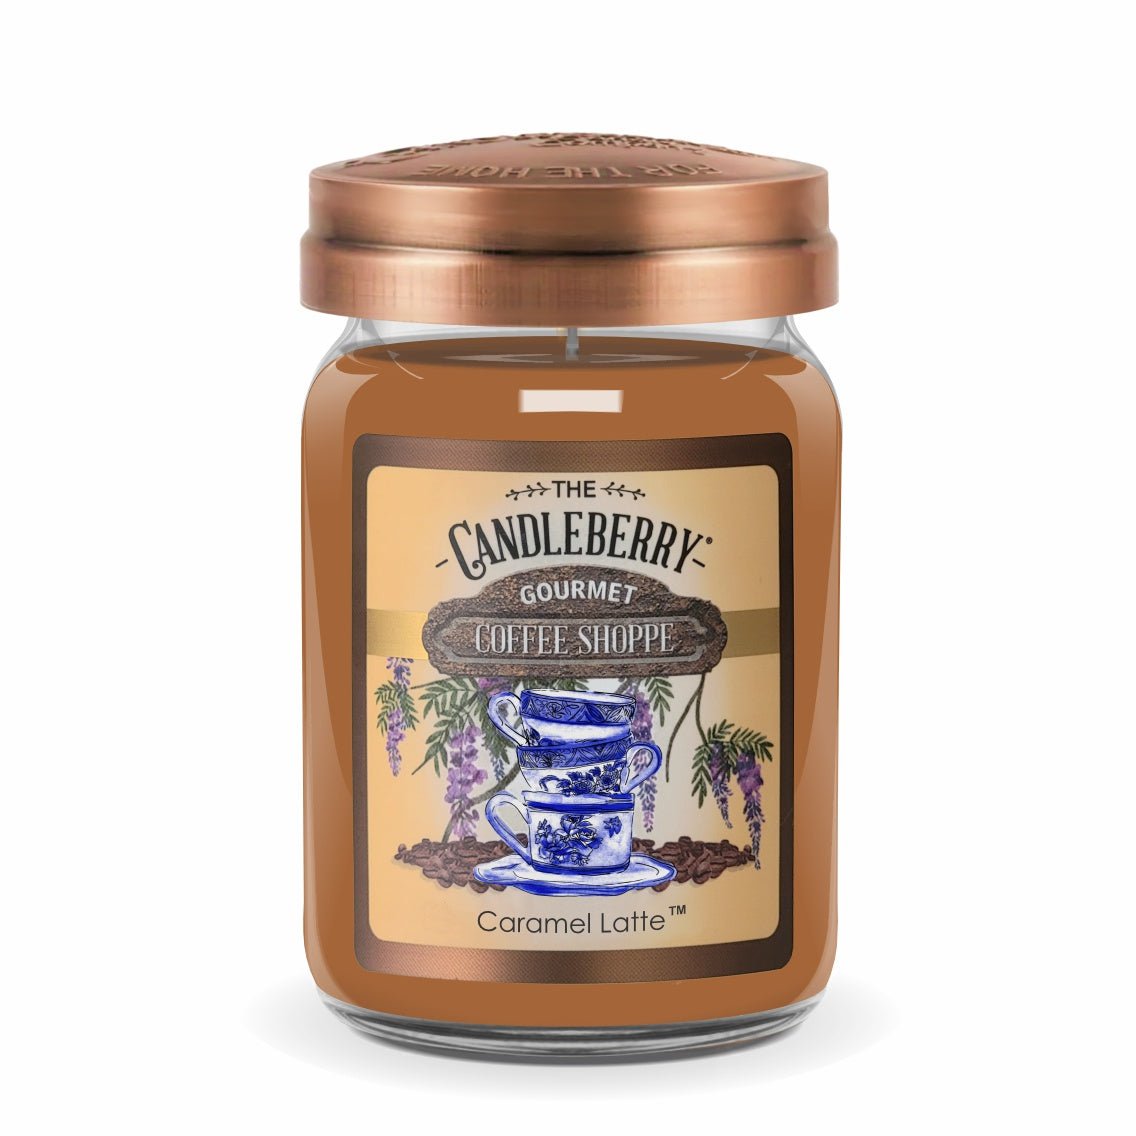 Coffee Shoppe - Caramel Latte™, Large Jar Candle - Spring - The Candleberry® Candle Company - Coffee Shoppe Large Jar Candle - The Candleberry Candle Company